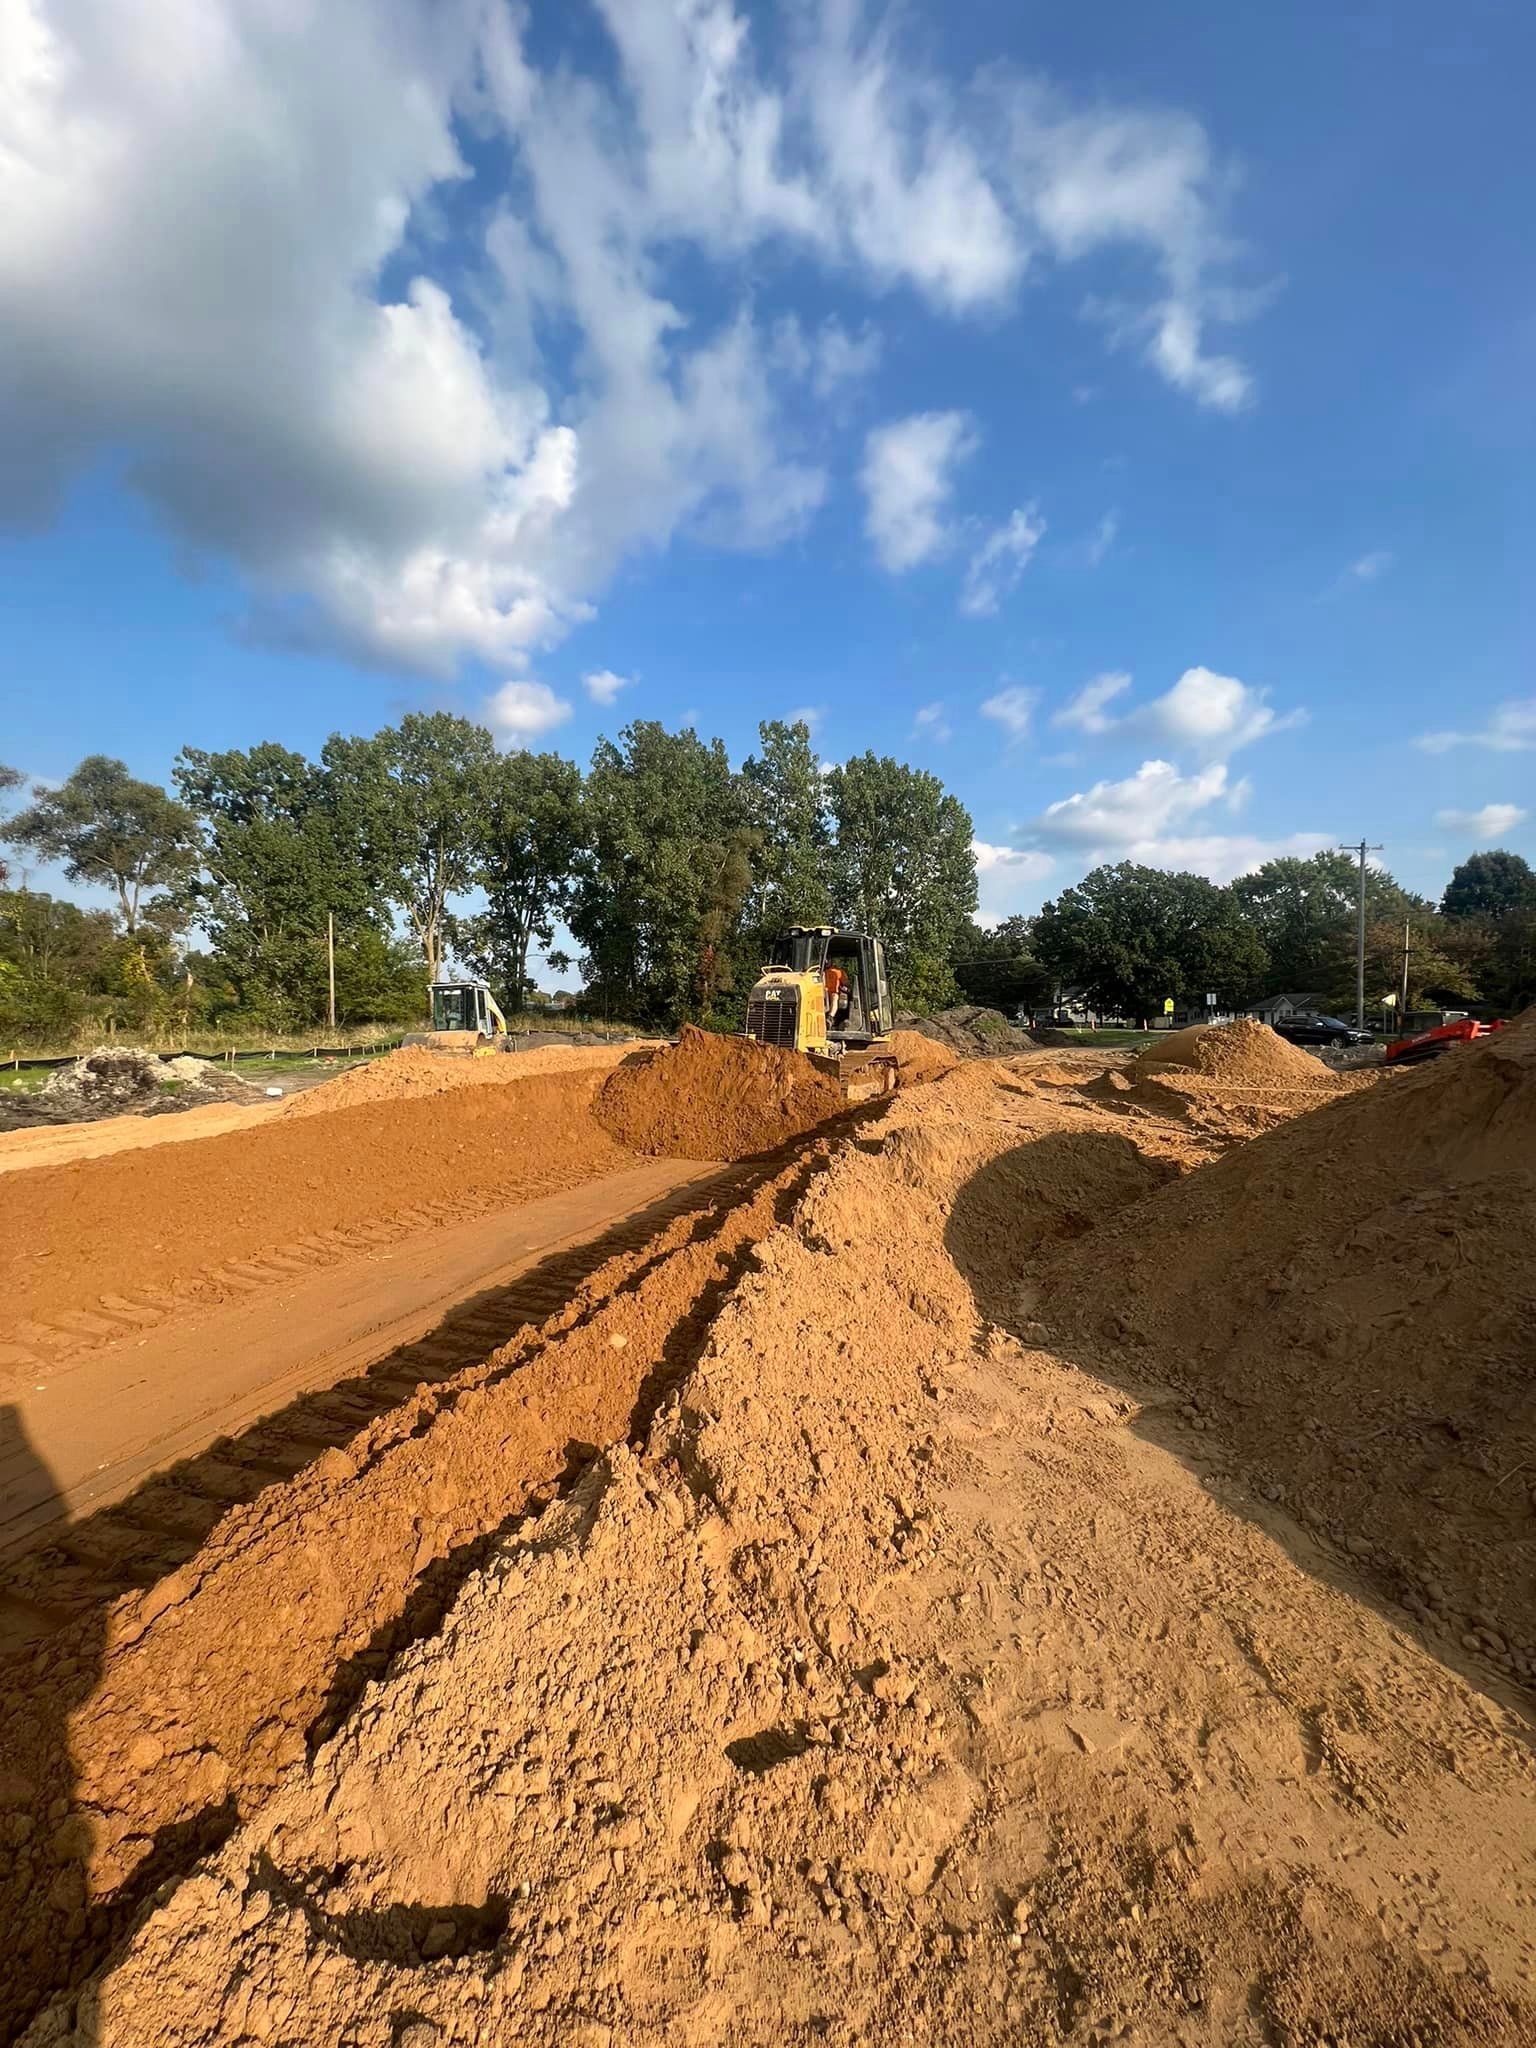  commercial excavation, few match the dedication and expertise that Warner Excavation, LLC brings. We are service providers and partners in turning your commercial vision into reality. Entrust your excavation needs to us and experience the difference that Warner Excavation, LLC can create. 